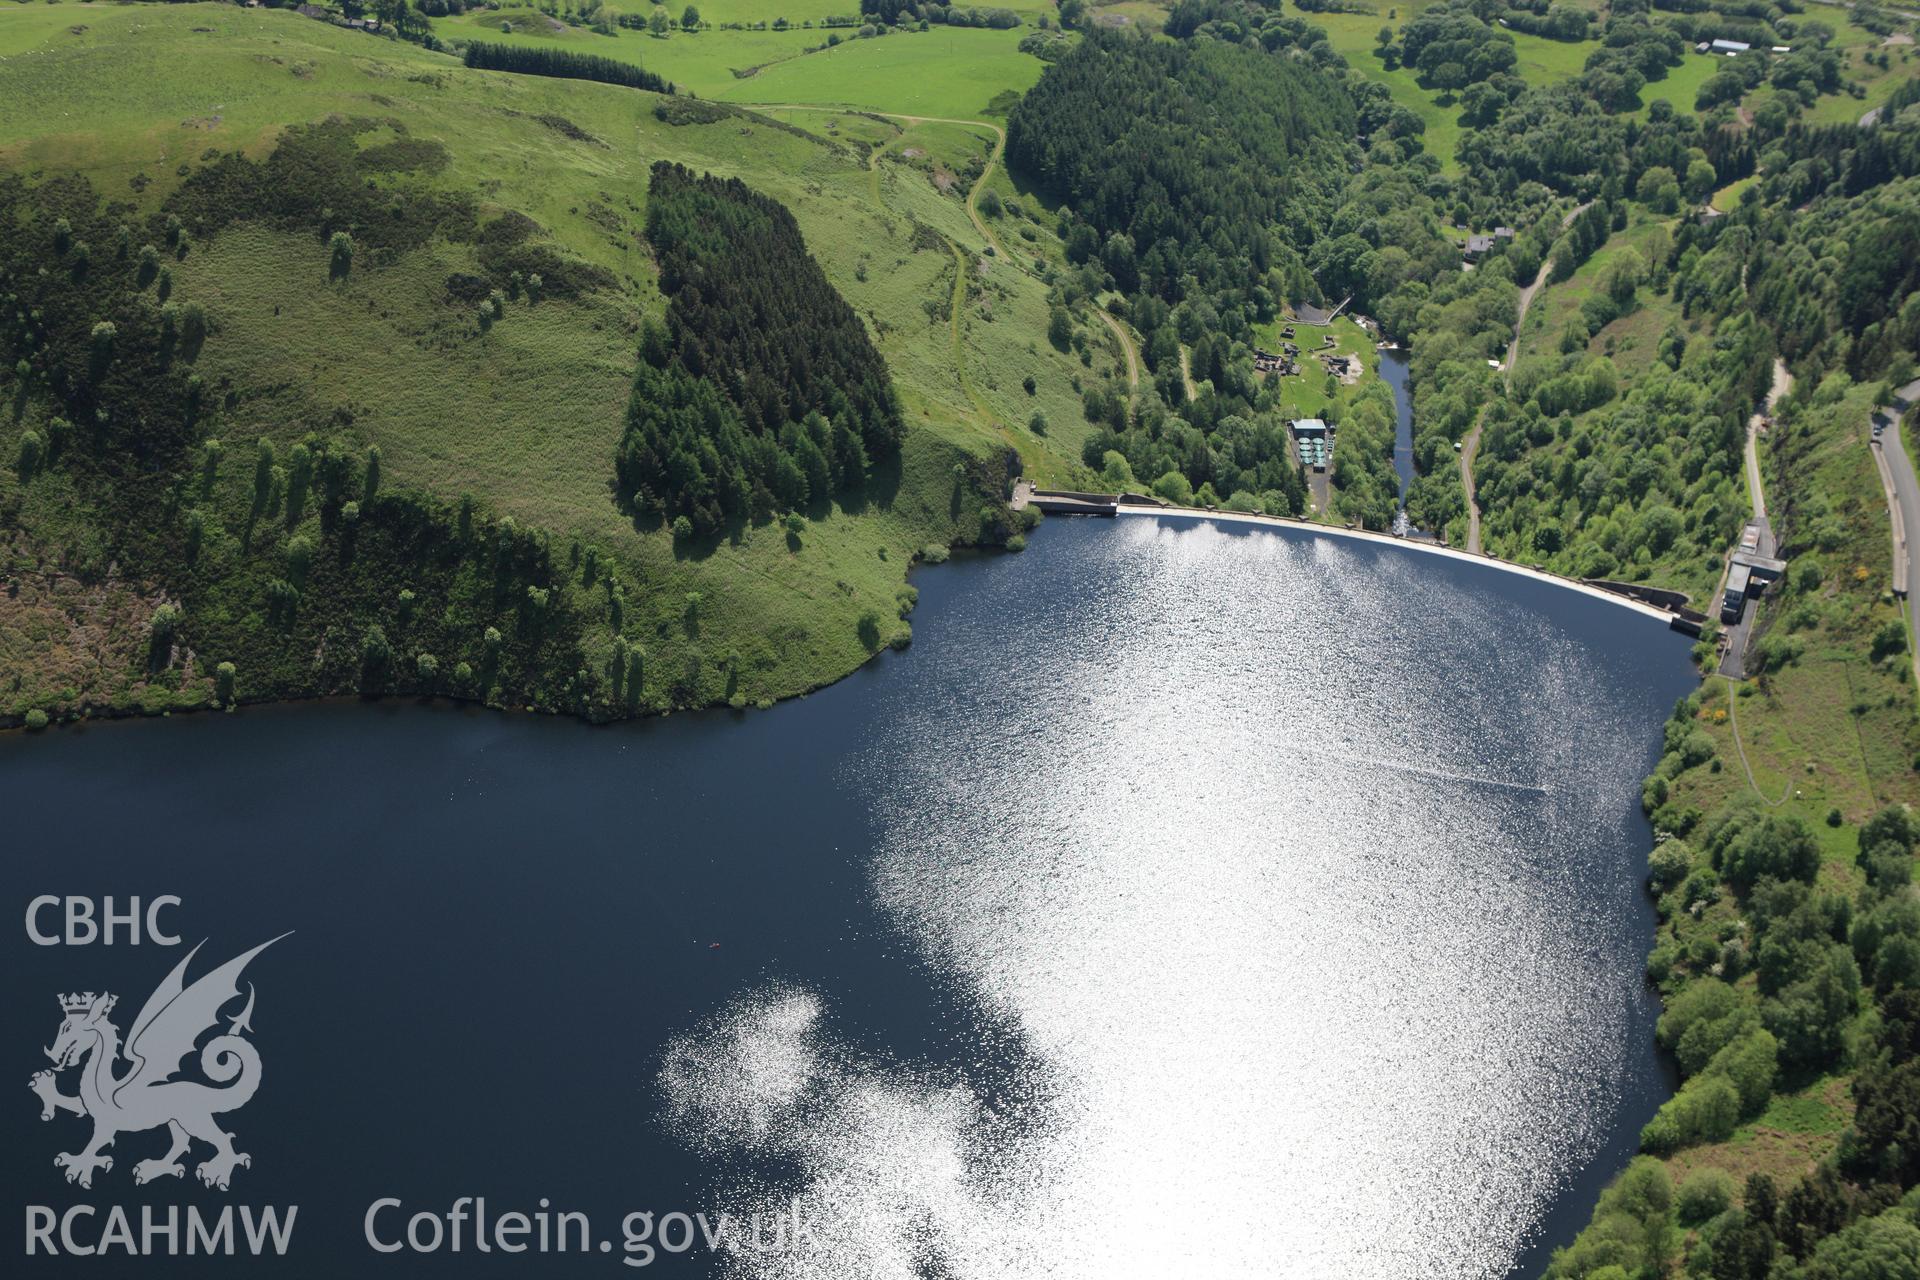 RCAHMW colour oblique aerial photograph of Llyn Clywedog Reservoir, Llanidloes. Taken on 02 June 2009 by Toby Driver